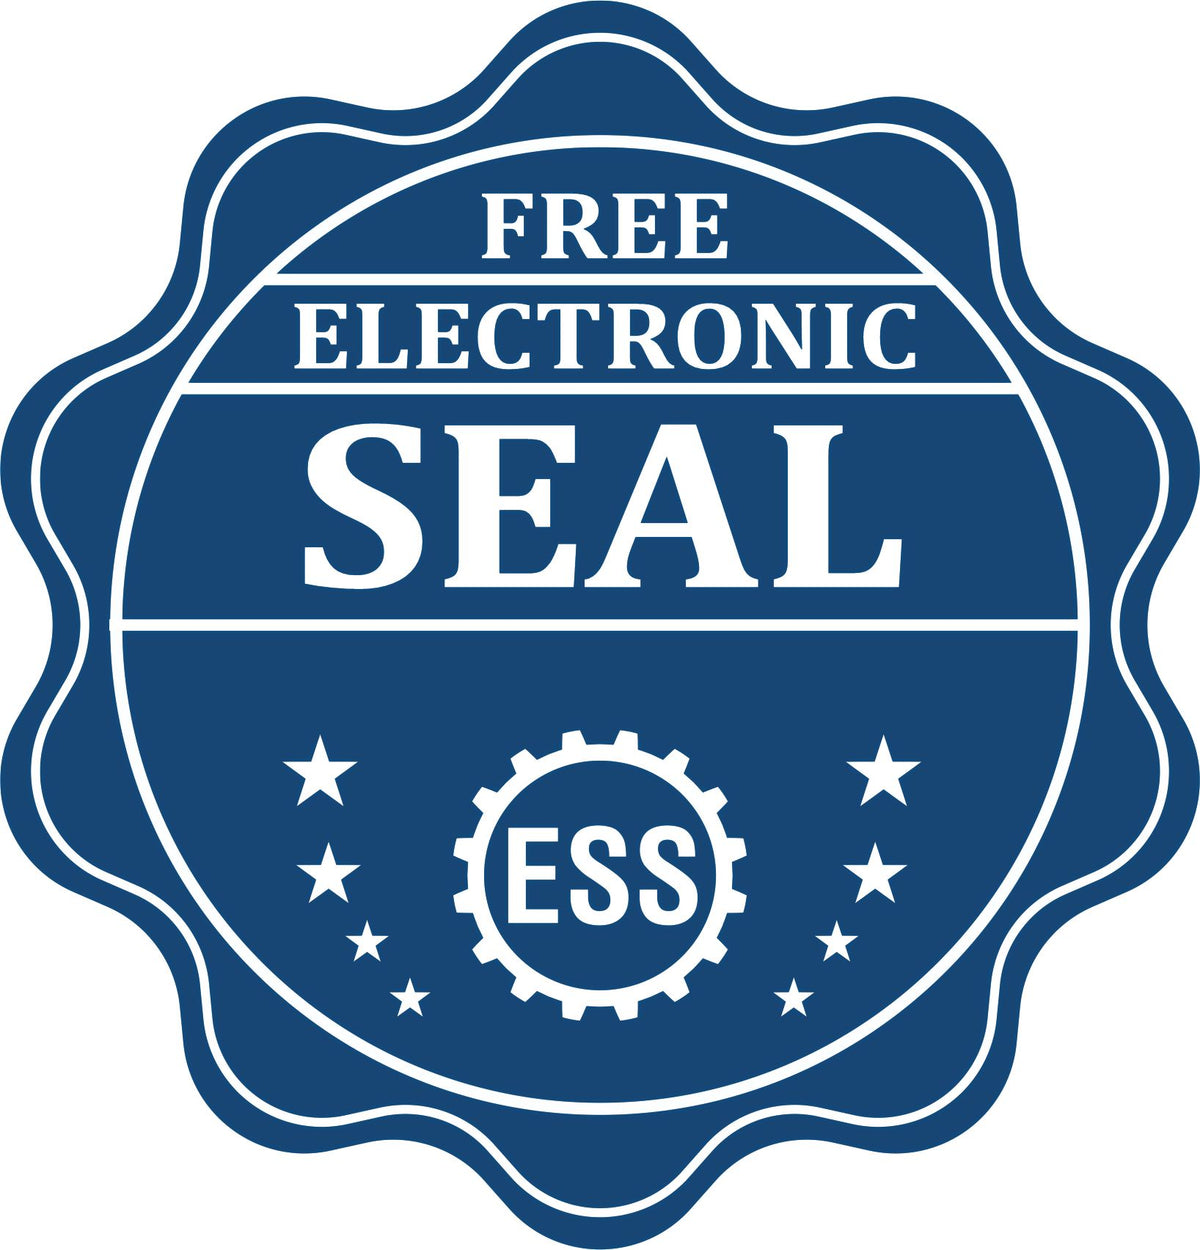 A badge showing a free electronic seal for the Self-Inking Maine Landscape Architect Stamp with stars and the ESS gear on the emblem.